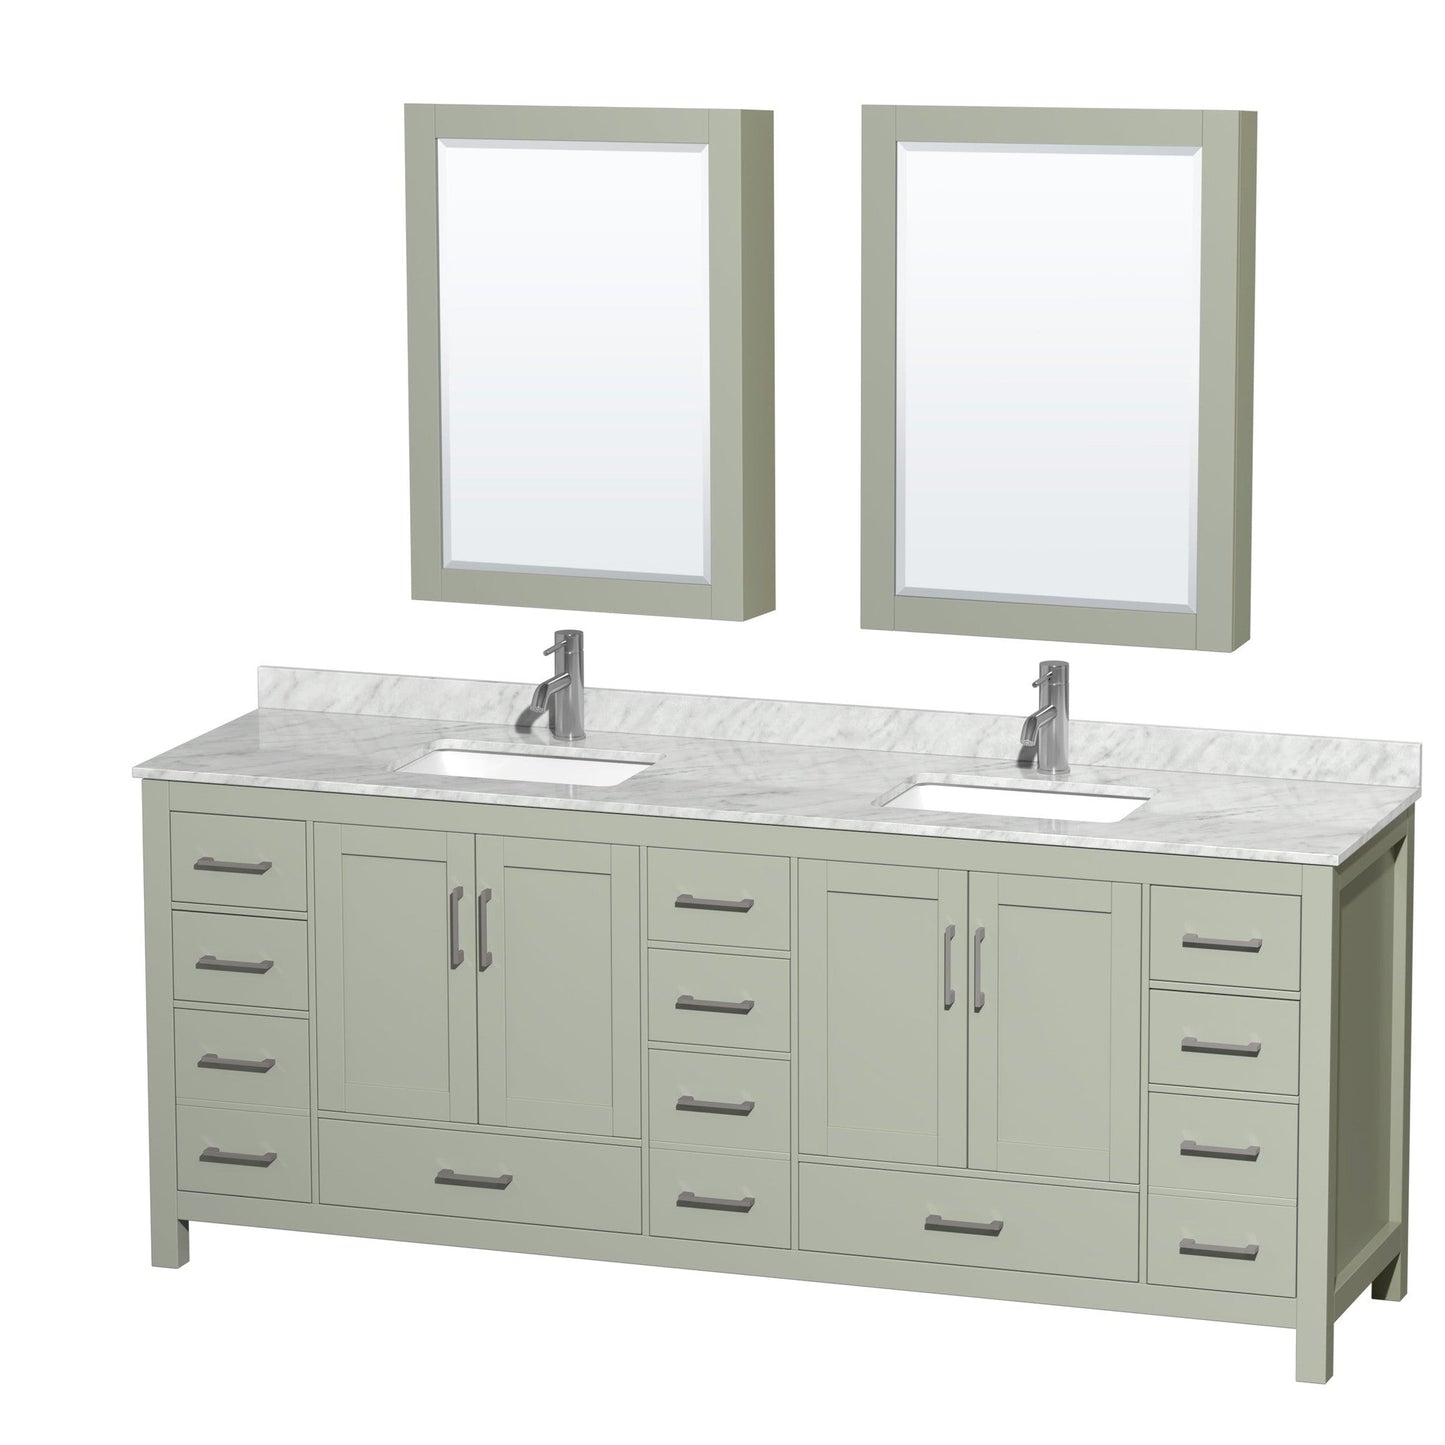 Sheffield 84" Double Bathroom Vanity in Light Green, White Carrara Marble Countertop, Undermount Square Sinks, Brushed Nickel Trim, Medicine Cabinets